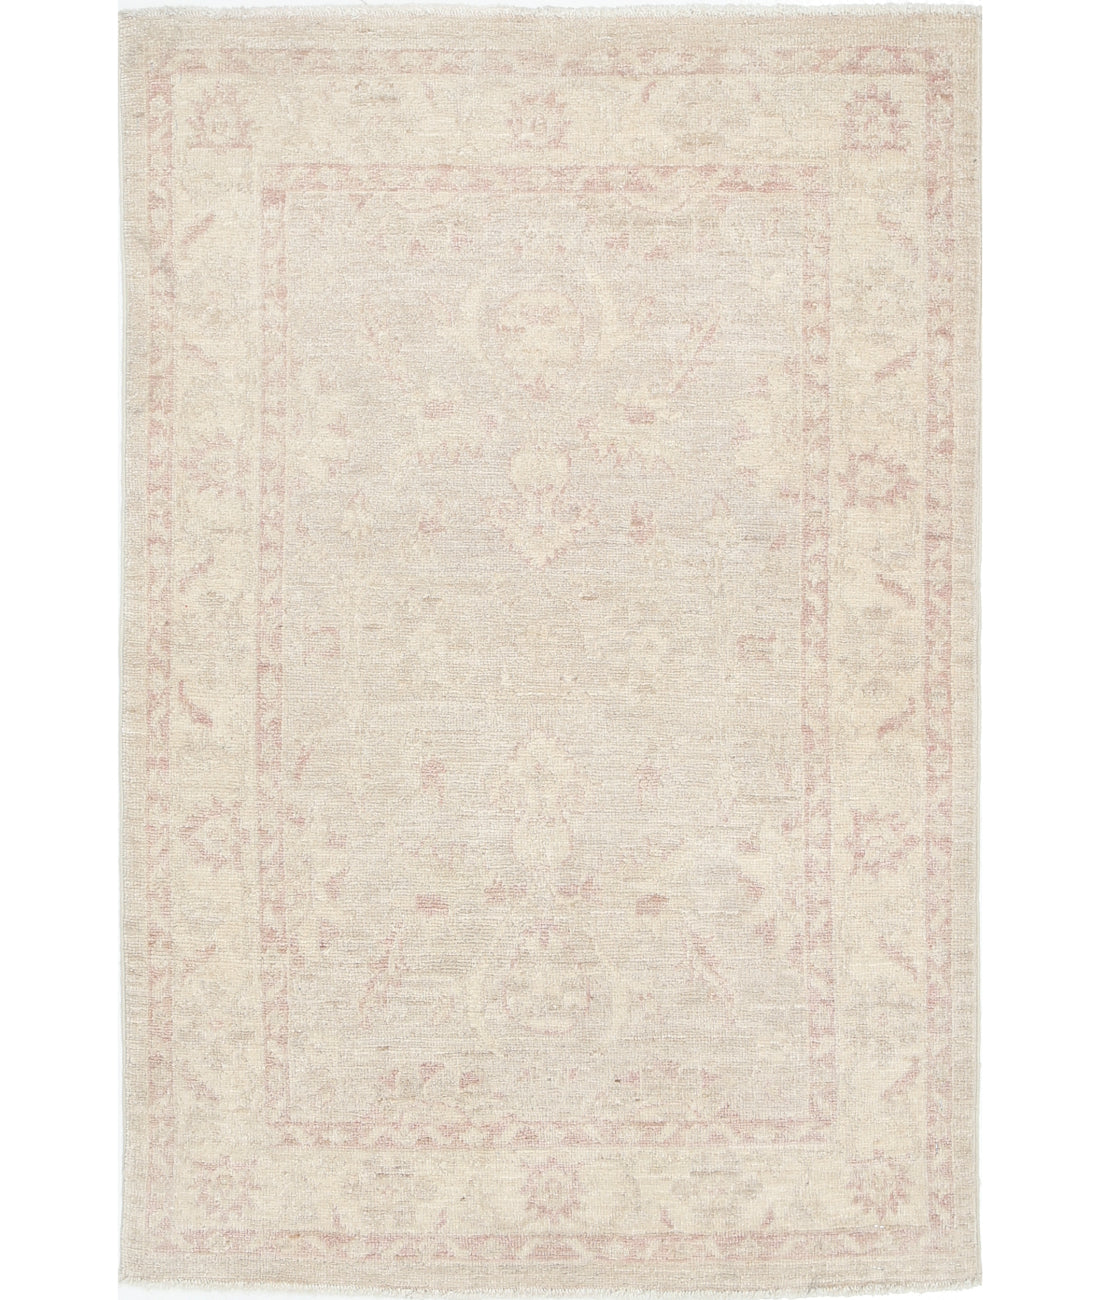 Hand Knotted Serenity Wool Rug - 2'7'' x 3'11'' 2'7'' x 3'11'' (78 X 118) / Grey / Ivory